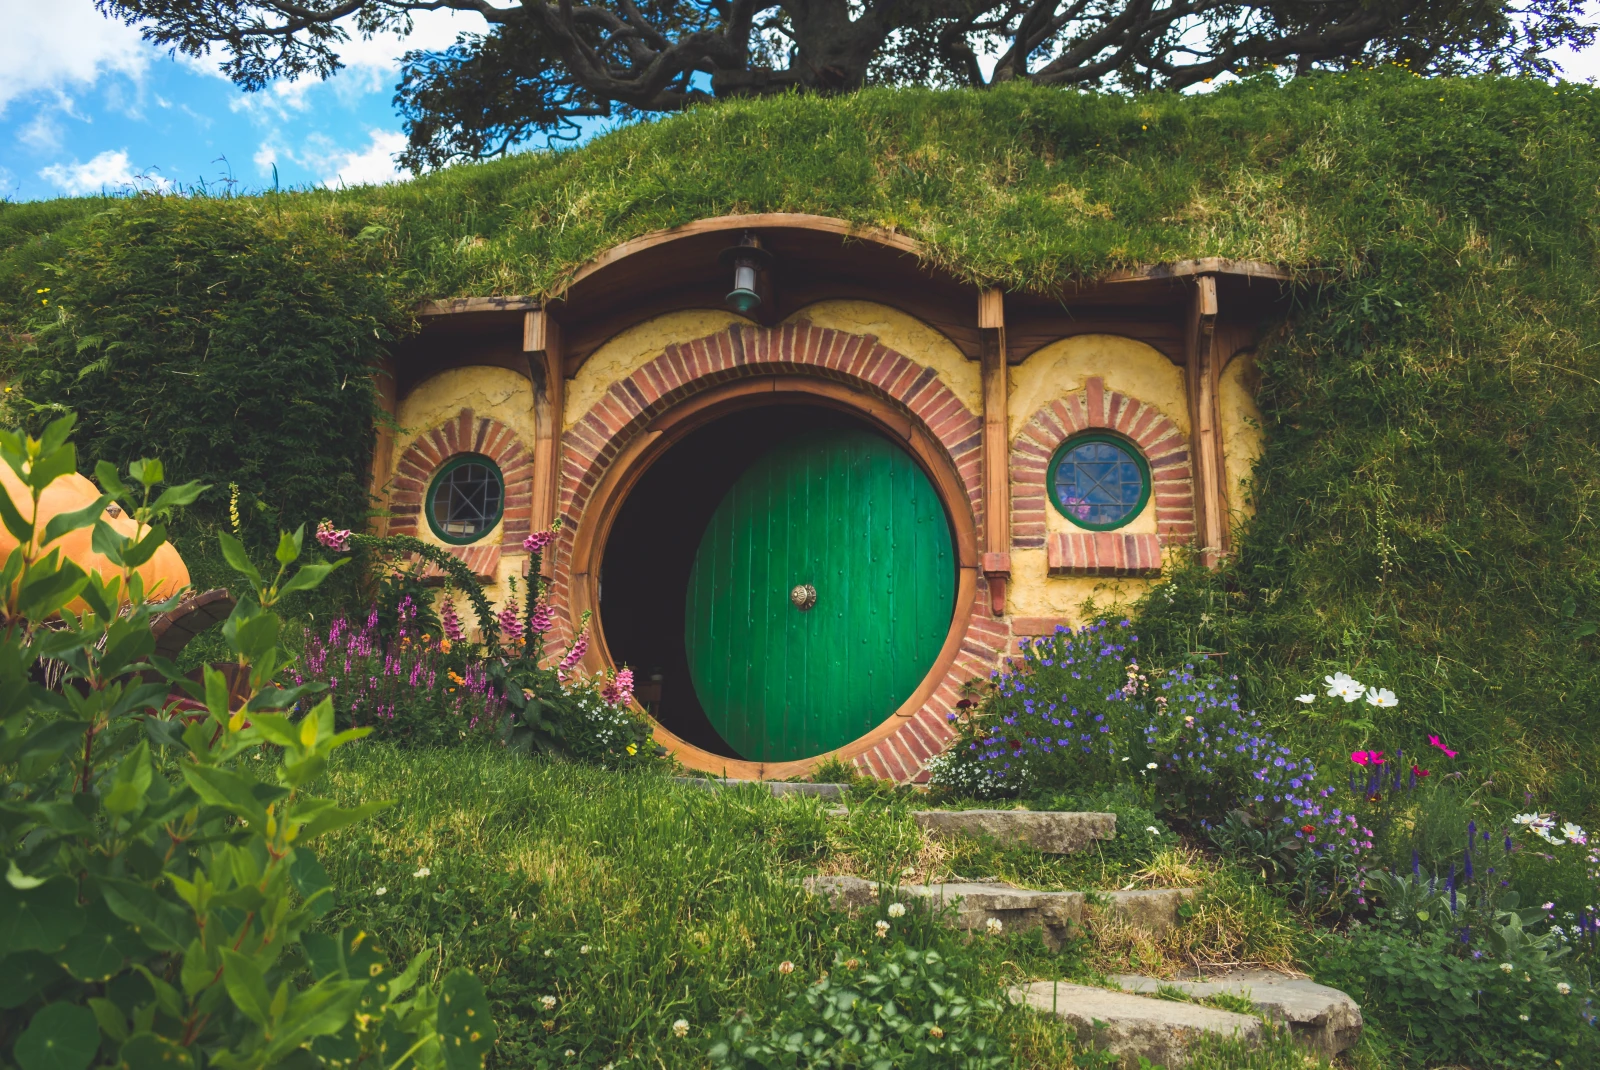 House with green door surrounded by grass and flowers during daytime